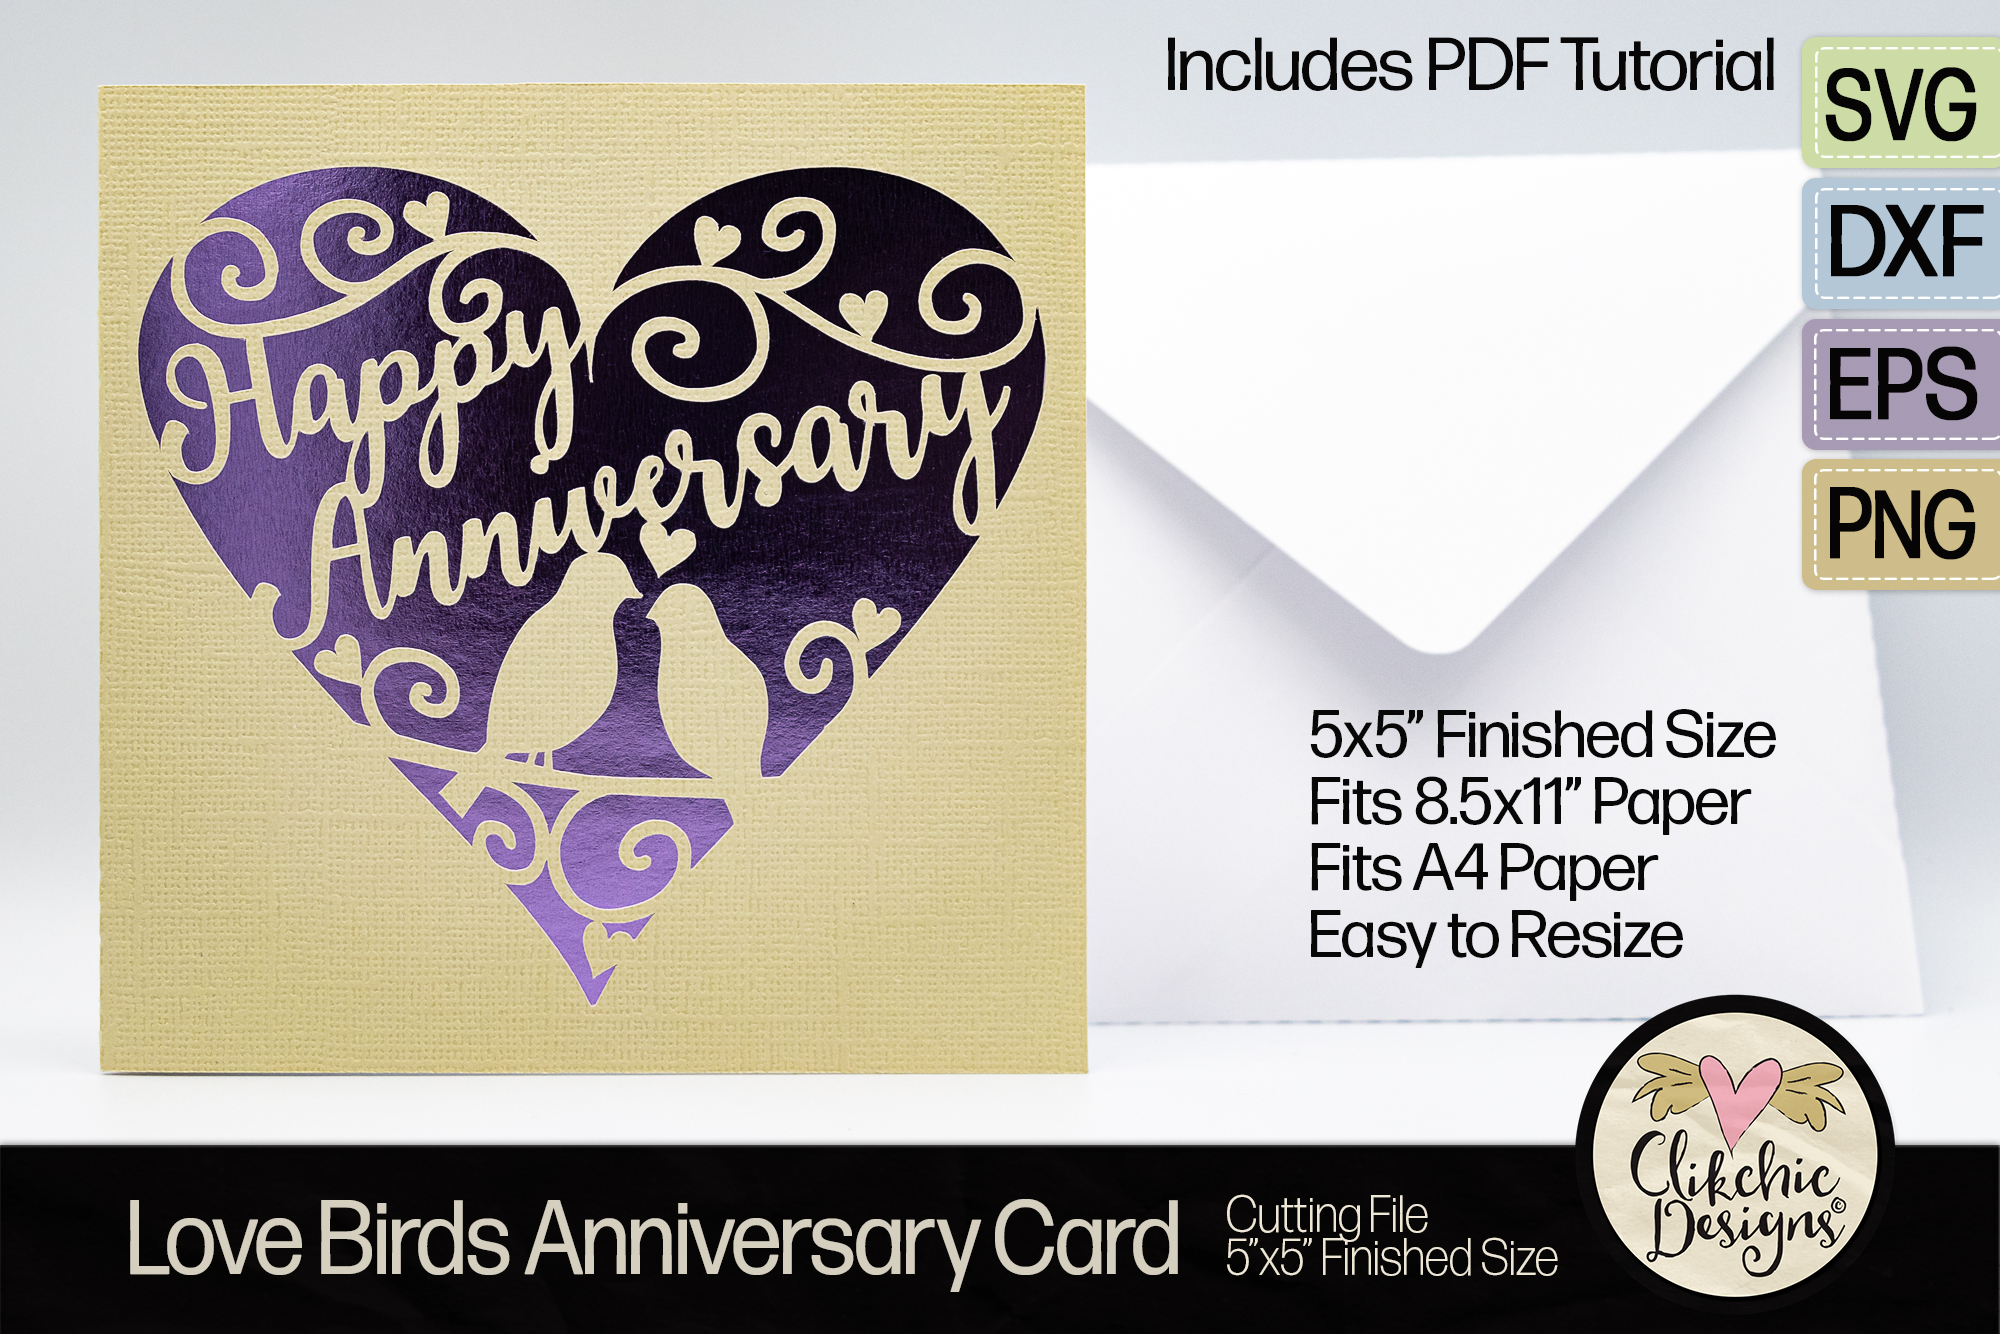 Happy Anniversery Love Birds SVG Card Cutting File